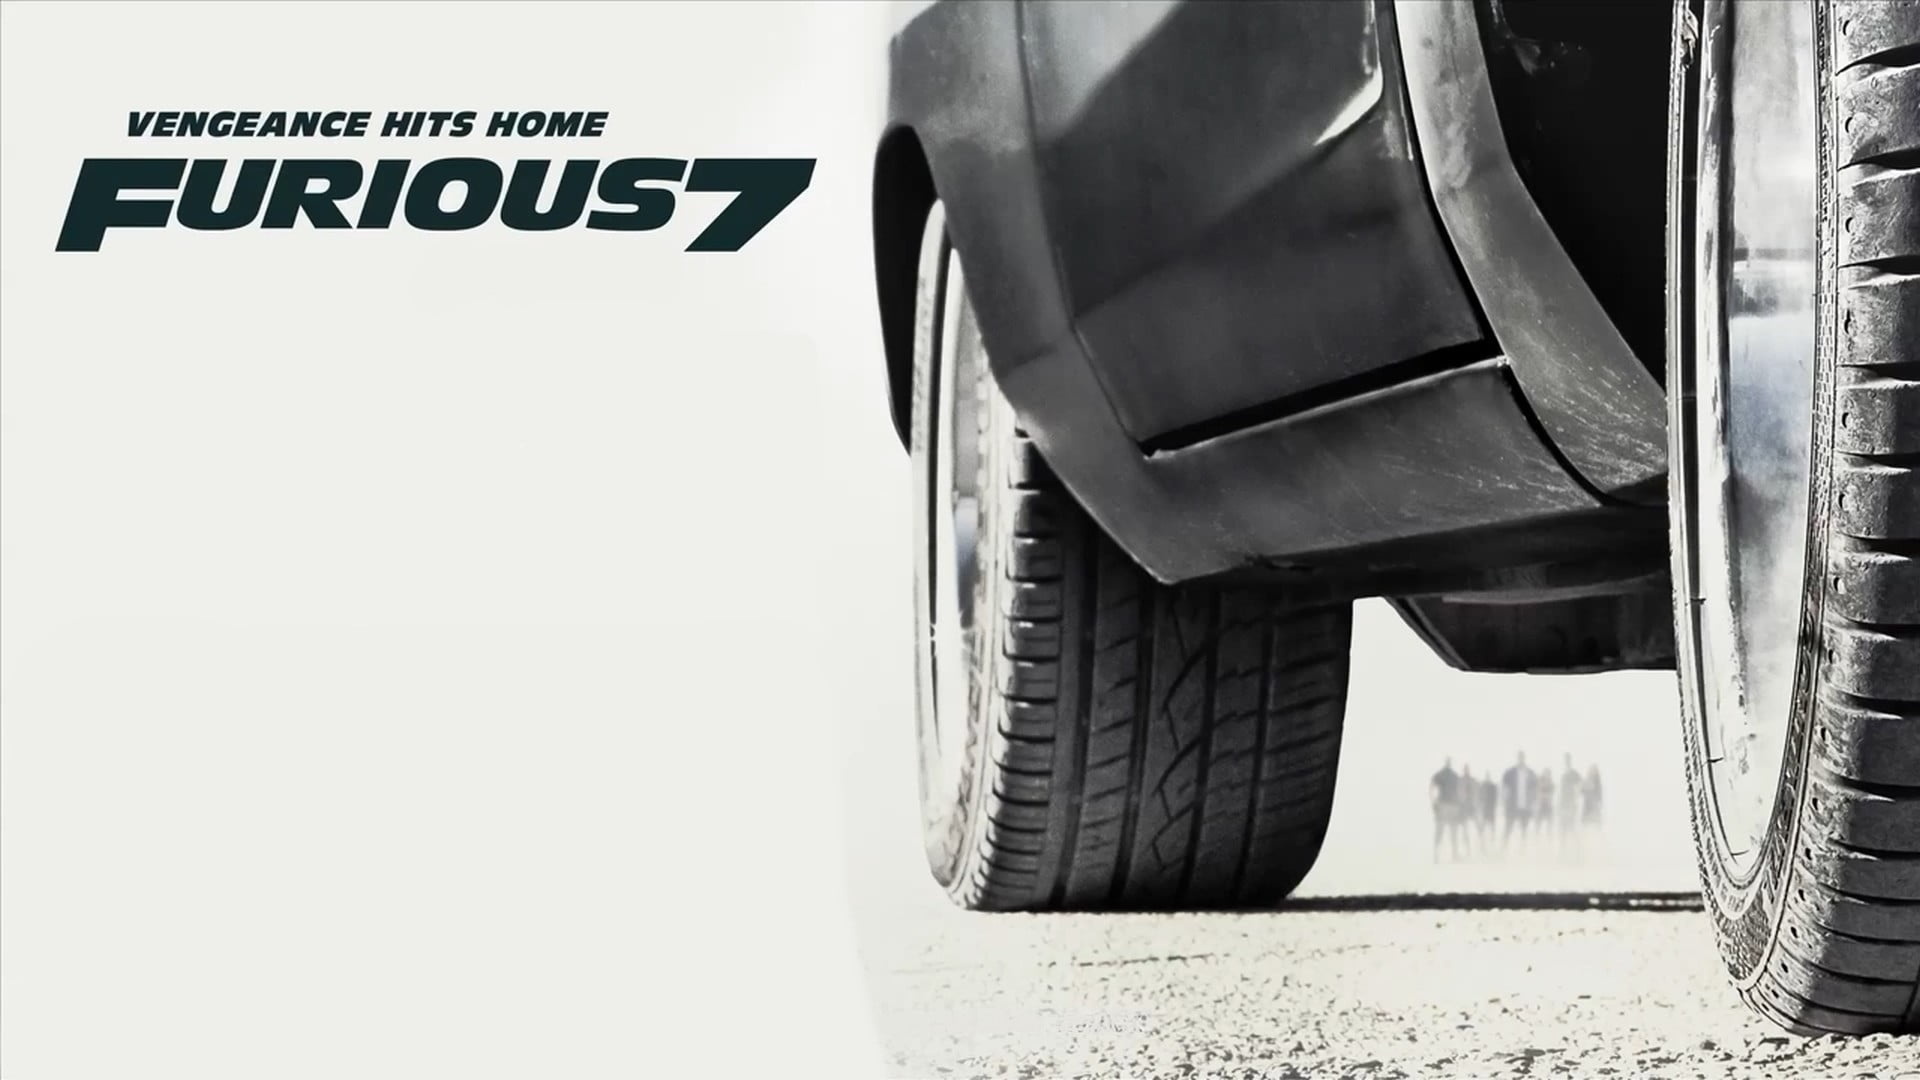 Furious 7, Vengeance hits home, HD wallpapers, Vin Diesel's iconic role, 1920x1080 Full HD Desktop